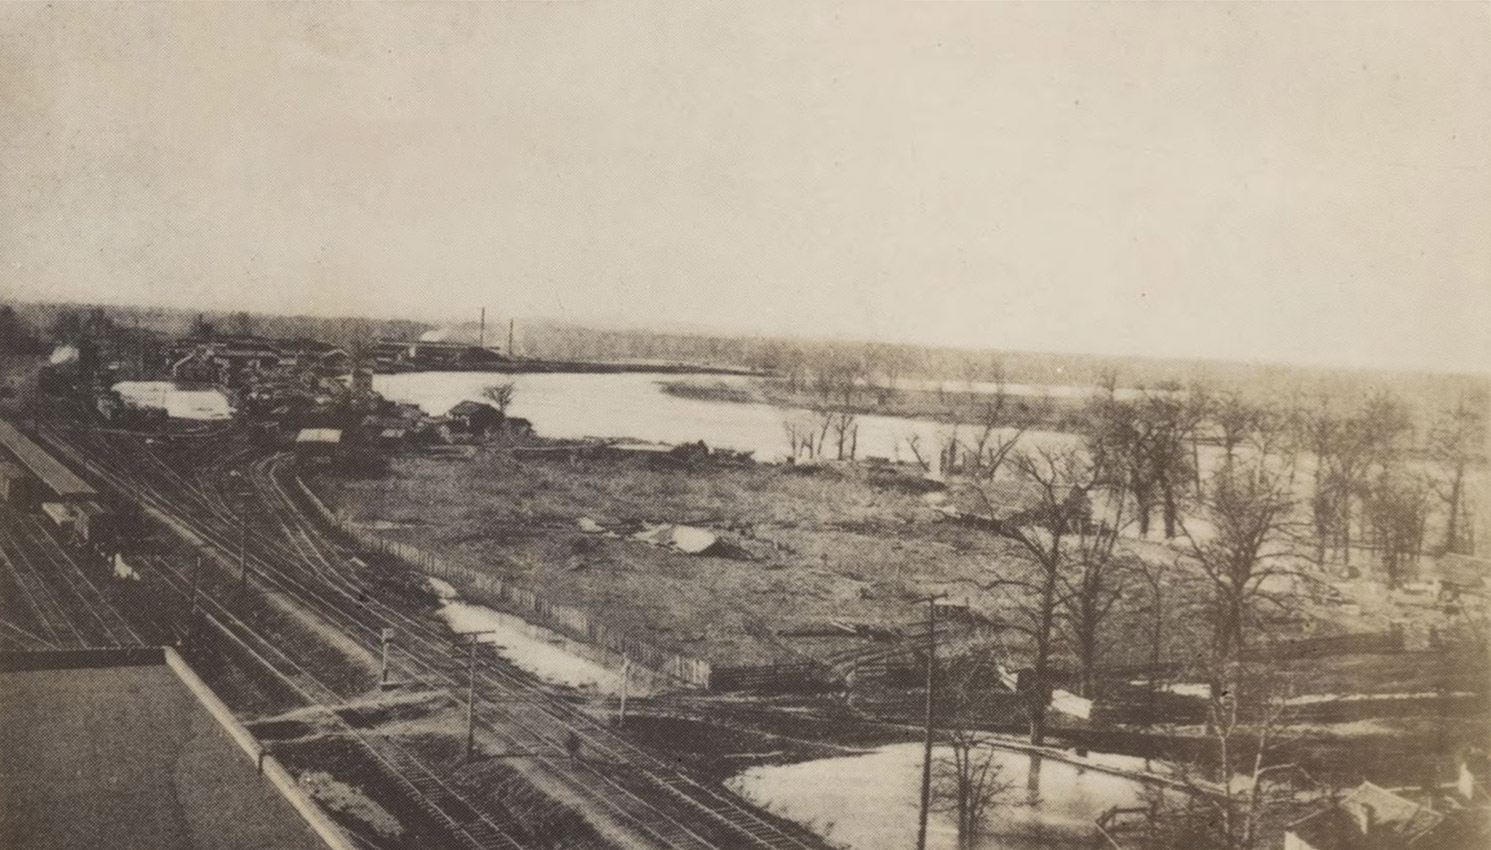 Railroad tracks, trees, water, seen from elevated spot